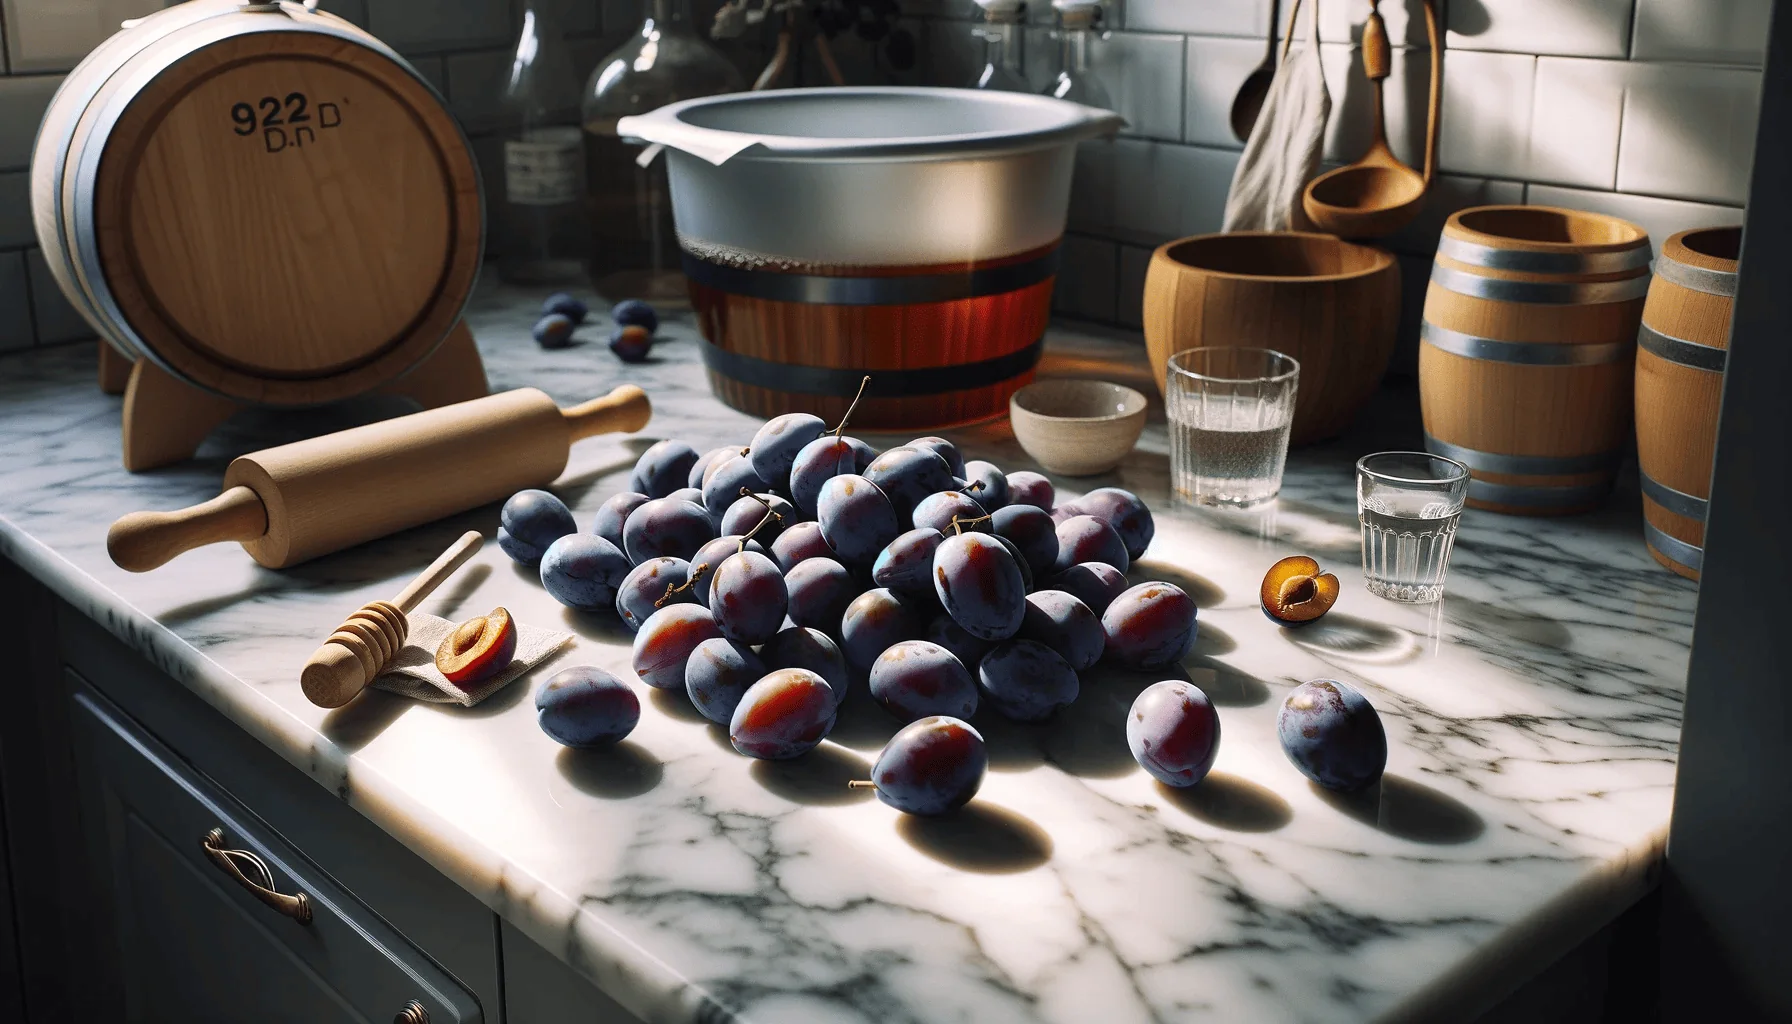 Ripe plums, wine yeast, wooden barrel, and a water bowl are neatly arranged